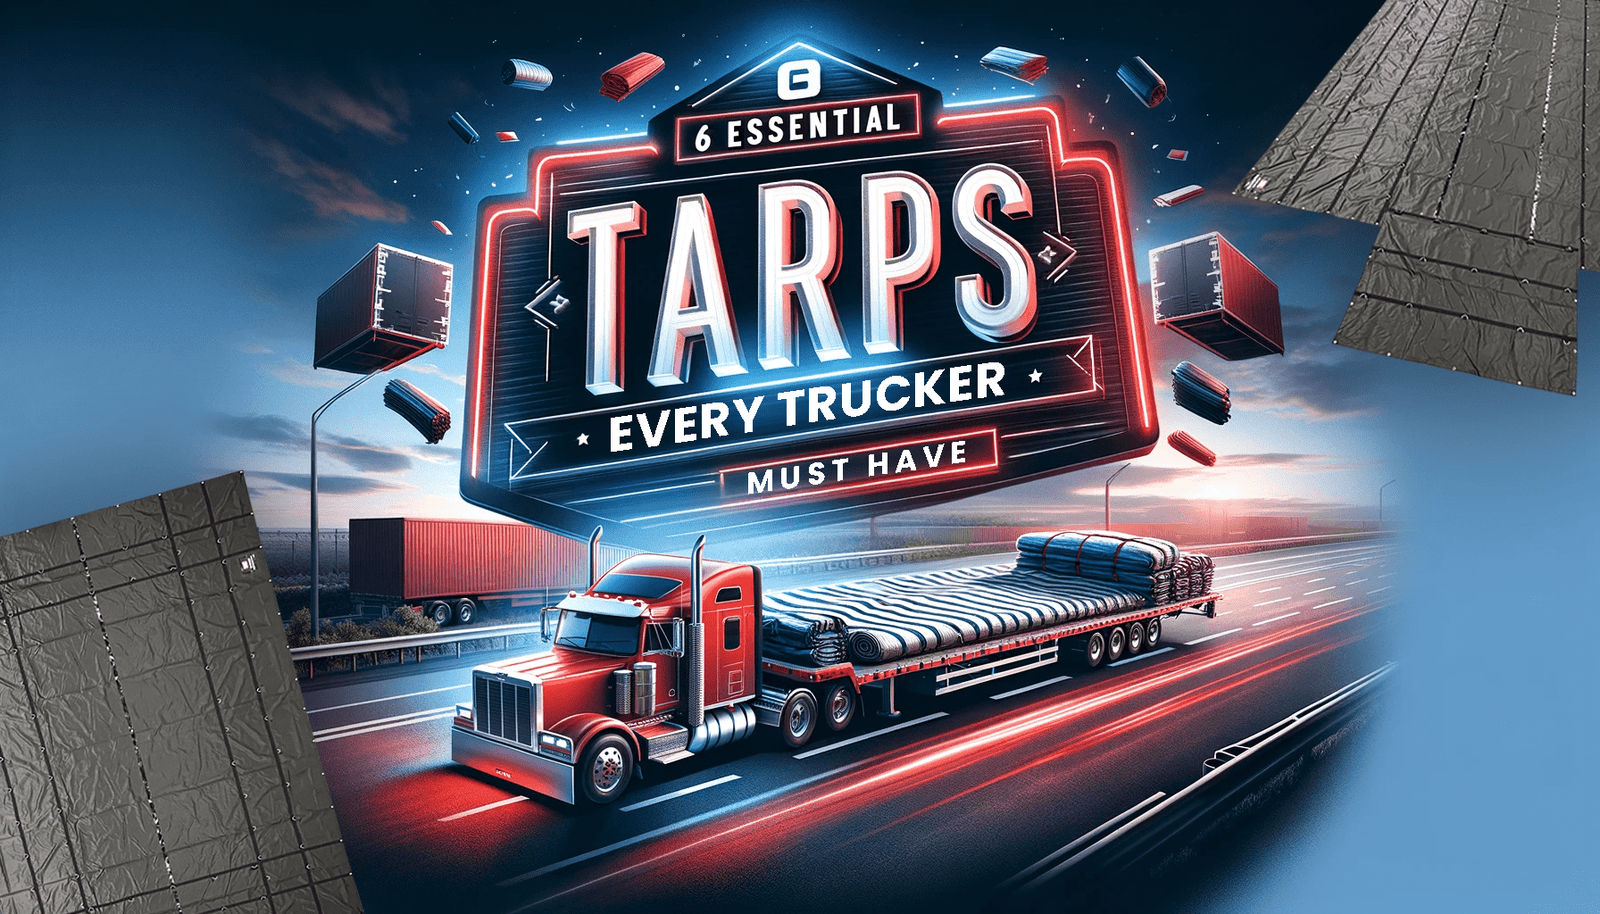 6 Essential Tarps Every Trucker Must Have: The Ultimate Guide by Tarps4Less - Tarps4Less